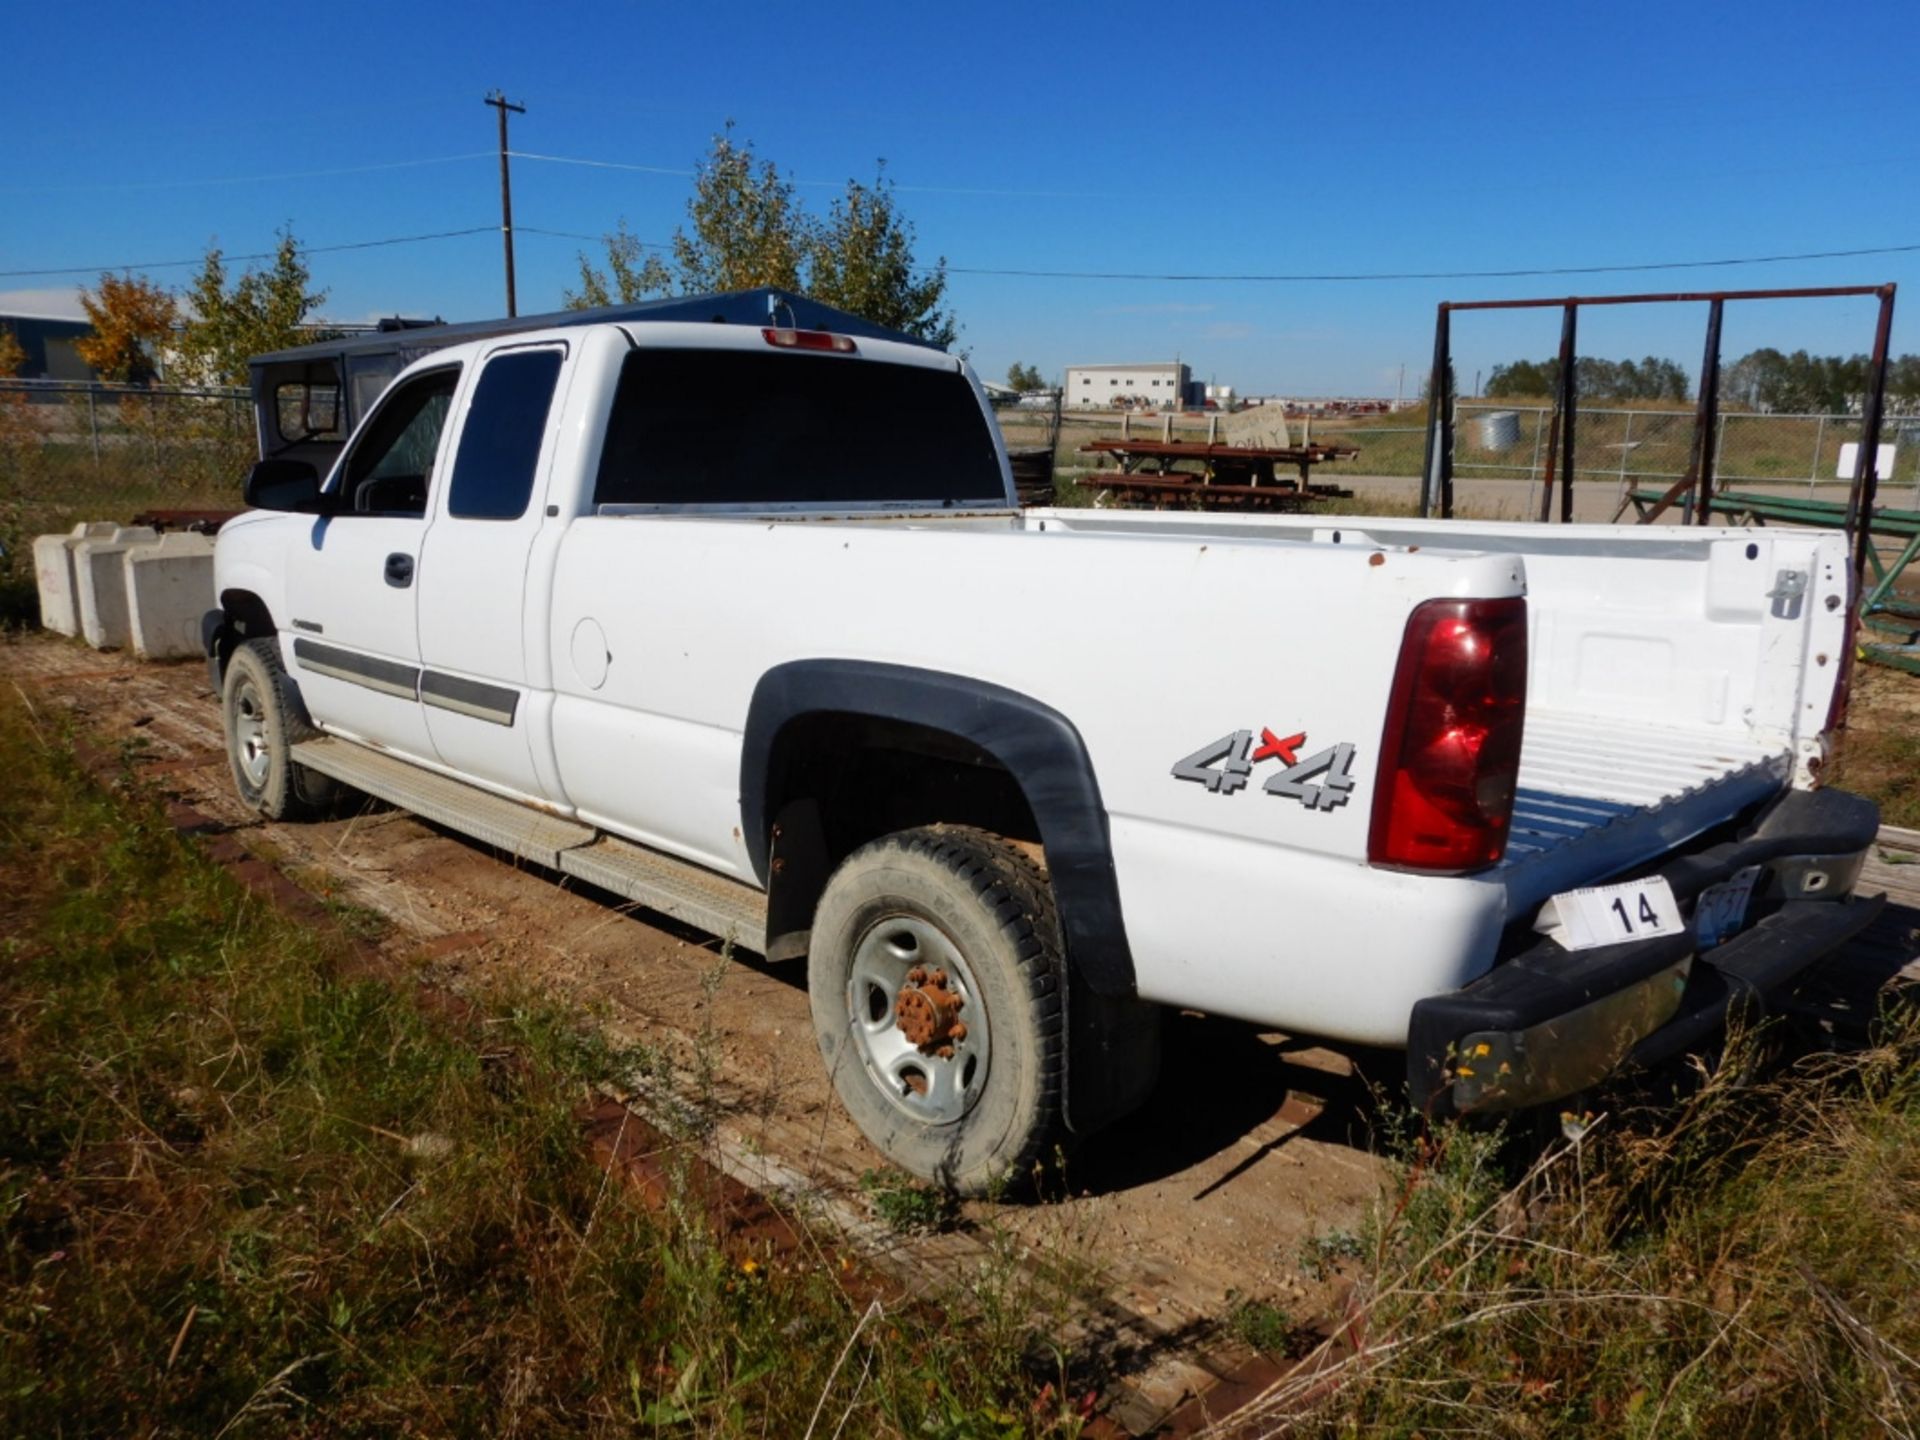 2003 CHEV 2500HD SILVERADO 4X4 PICKUP W/ EXT CAB 6.0 L V8 ENGINE, AT, IN-OPERABLE - Image 2 of 10